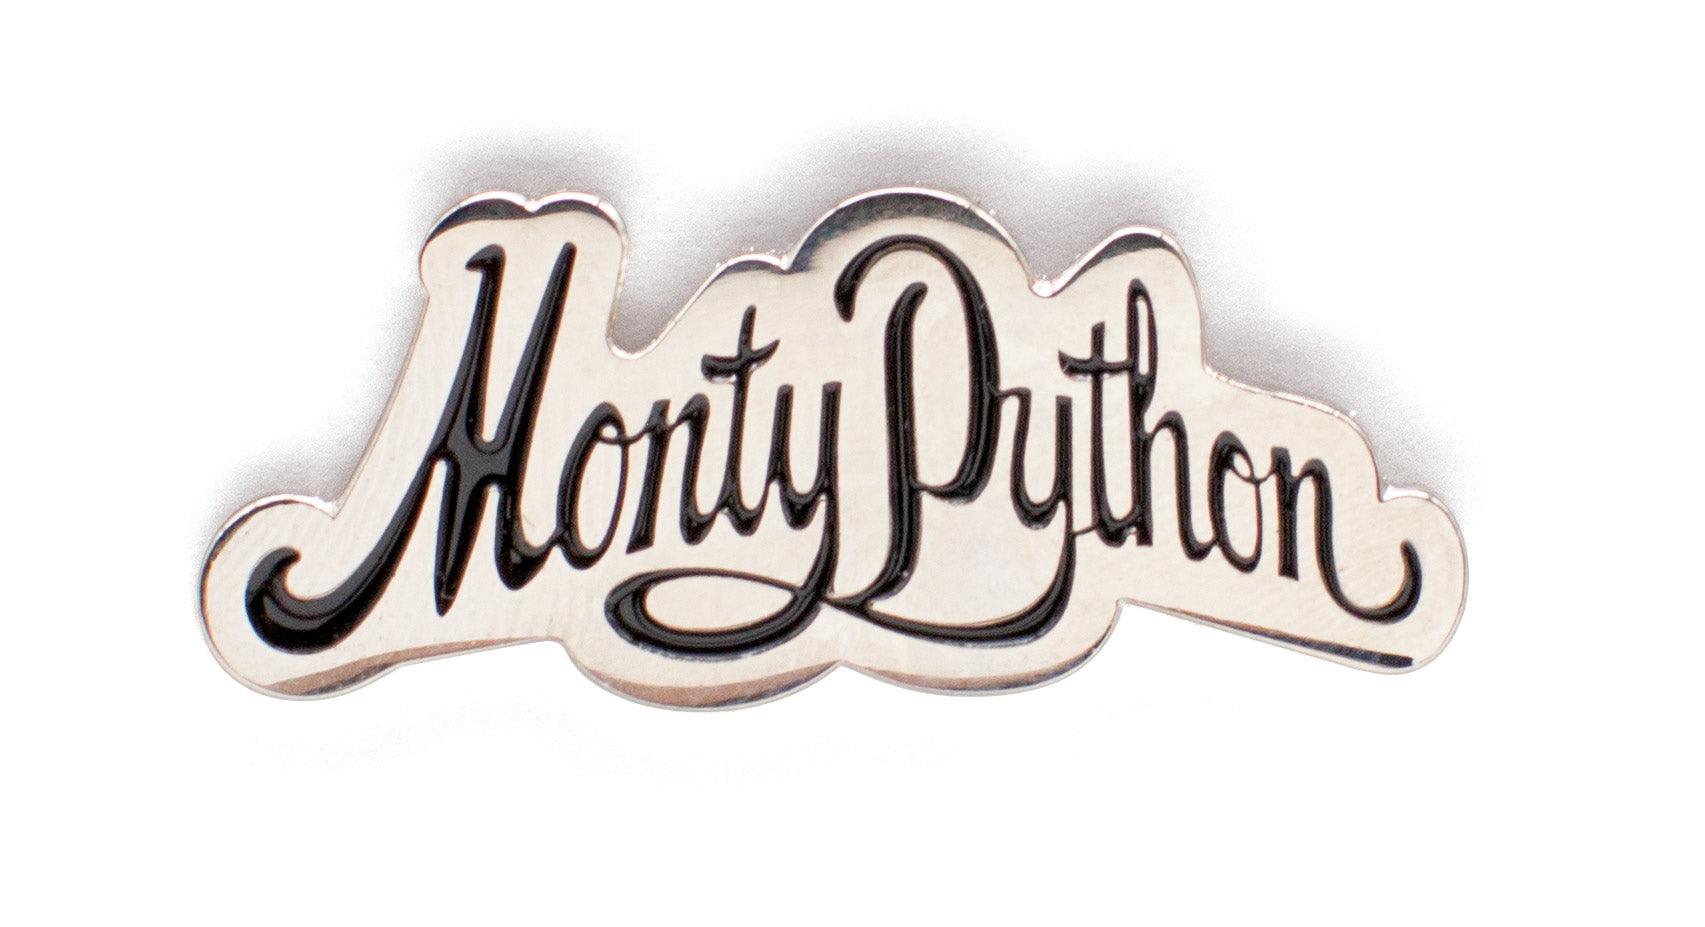 Product photo of Monty Python Logo Enamel Pin Set, a novelty gift manufactured by The Unemployed Philosophers Guild.